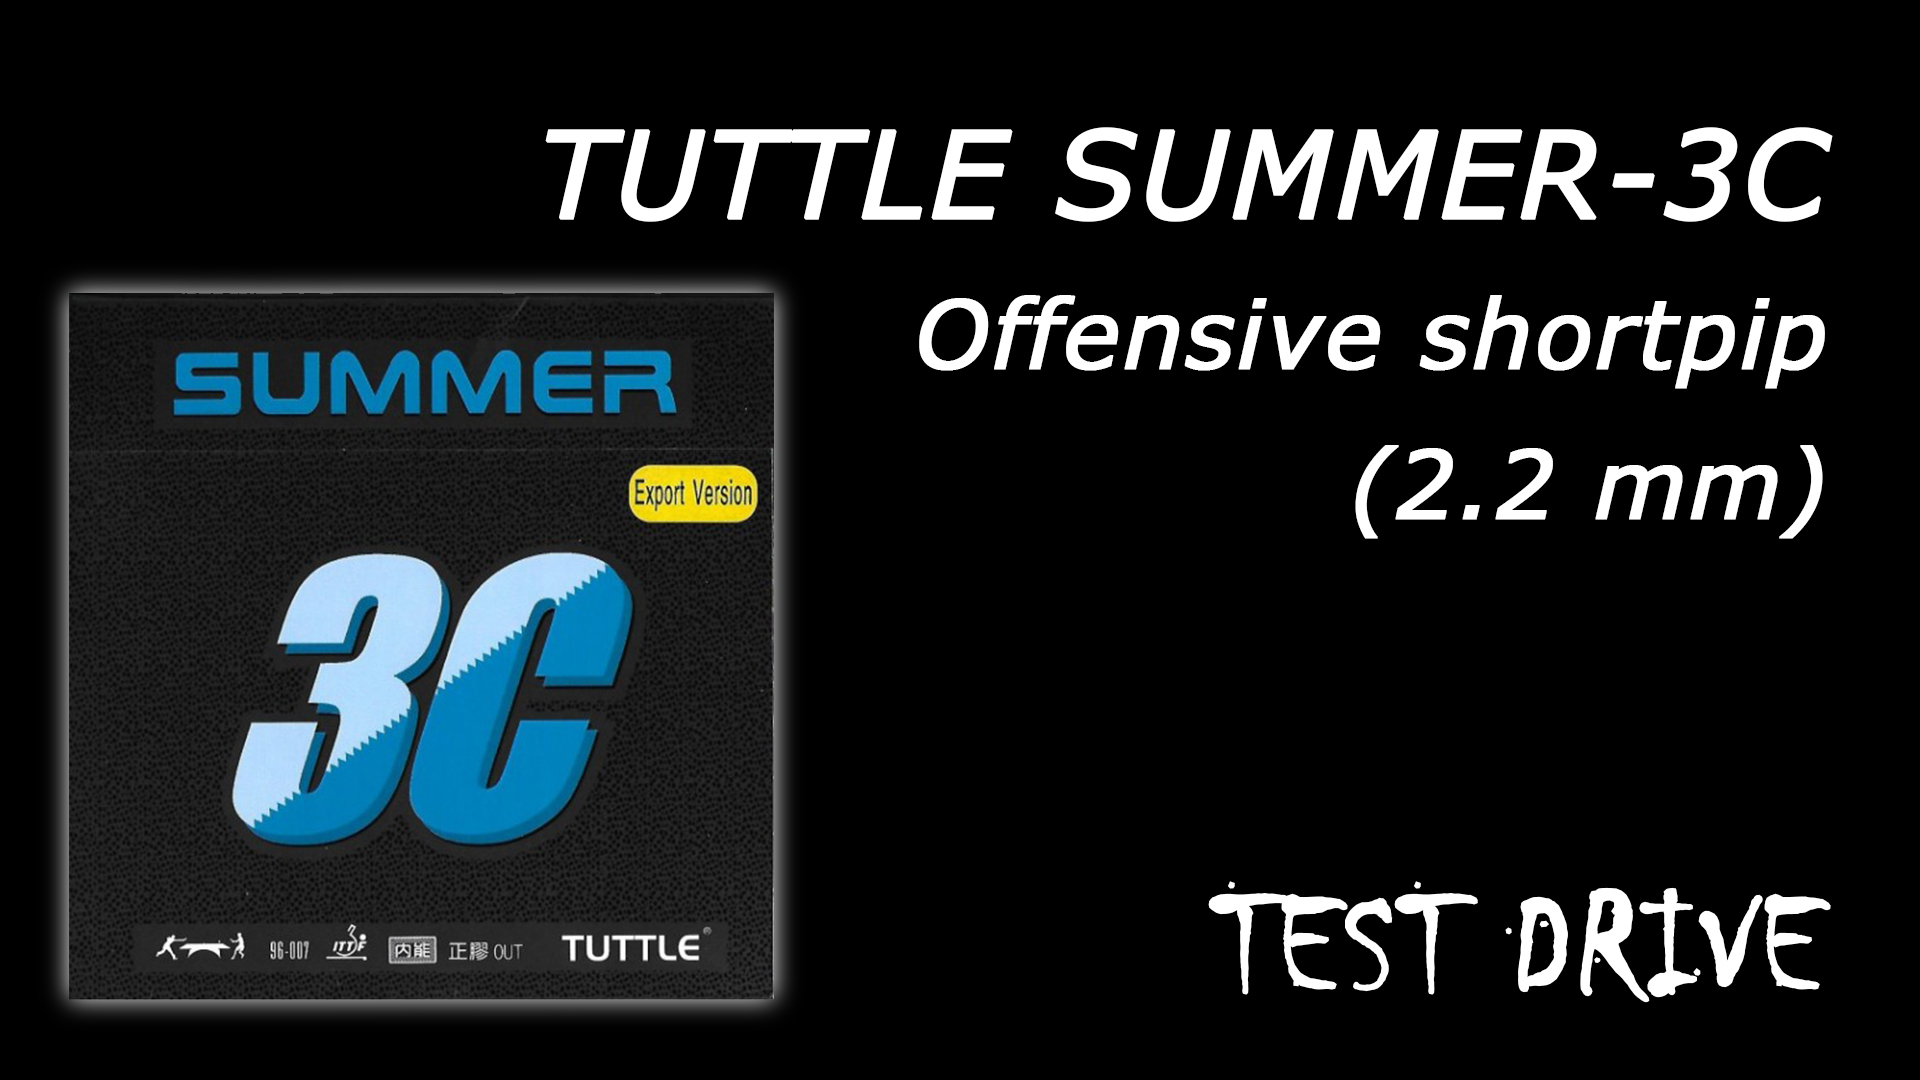 image/cache/catalog/Review images/pps-ยางปิงปอง-tuttle-summer-3C-cover-1920x1080.jpg